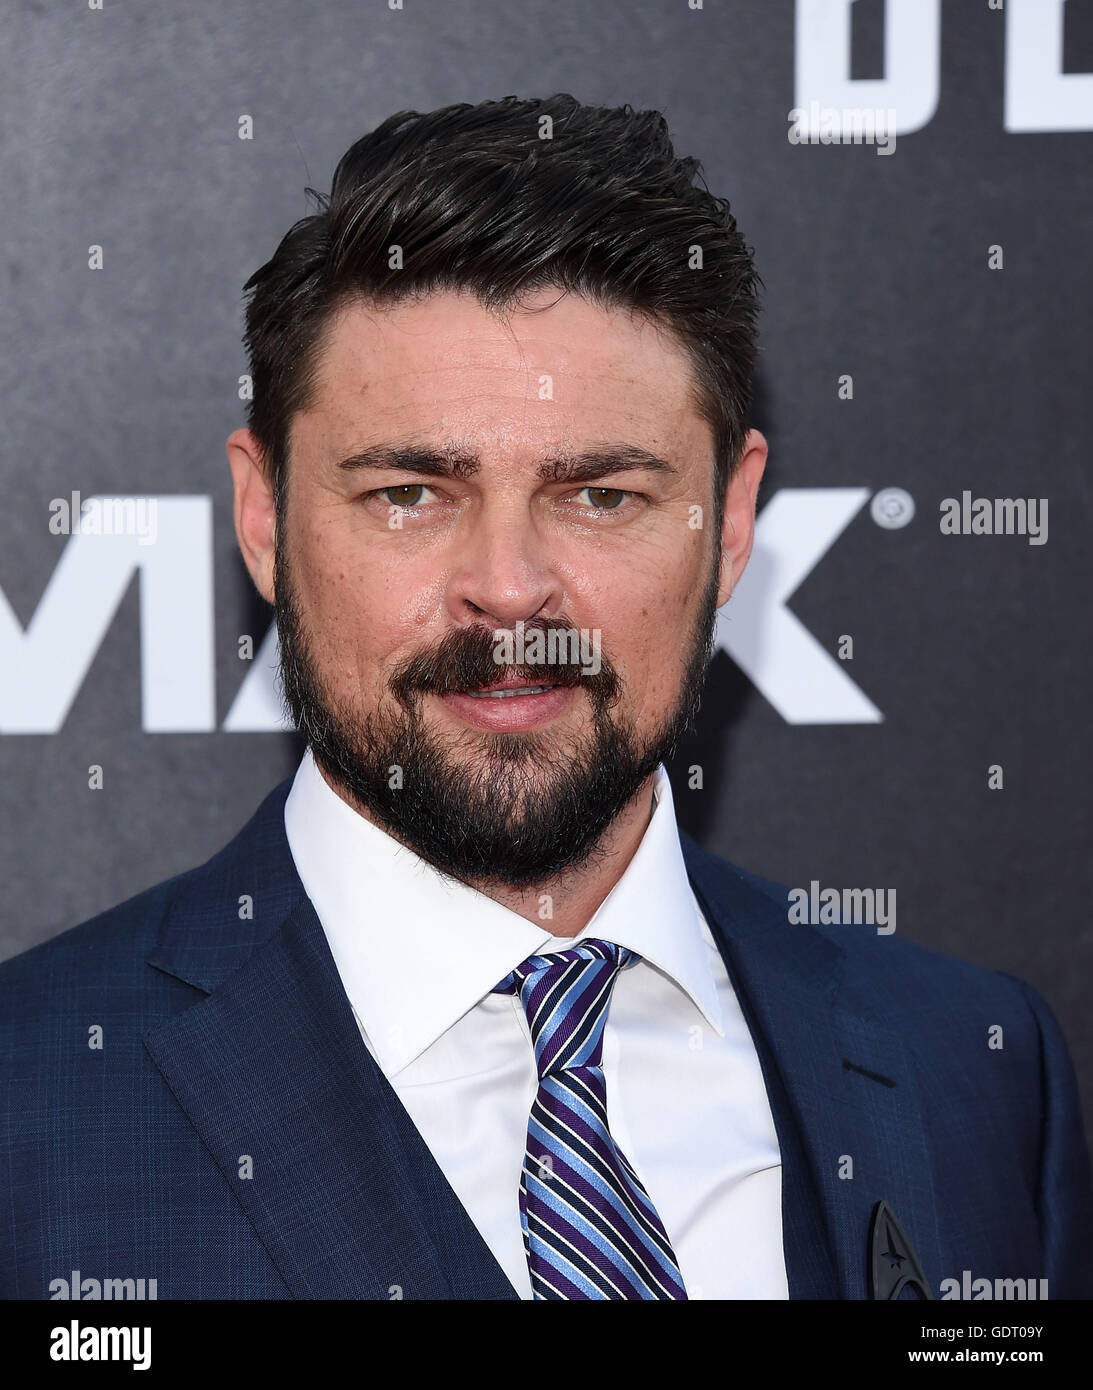 San Diego, California, USA. 20th July, 2016. Karl Urban arrives for the premiere of the film 'Star Trek Beyond' at the Embarcadero Marina Park. Credit:  Lisa O'Connor/ZUMA Wire/Alamy Live News Stock Photo